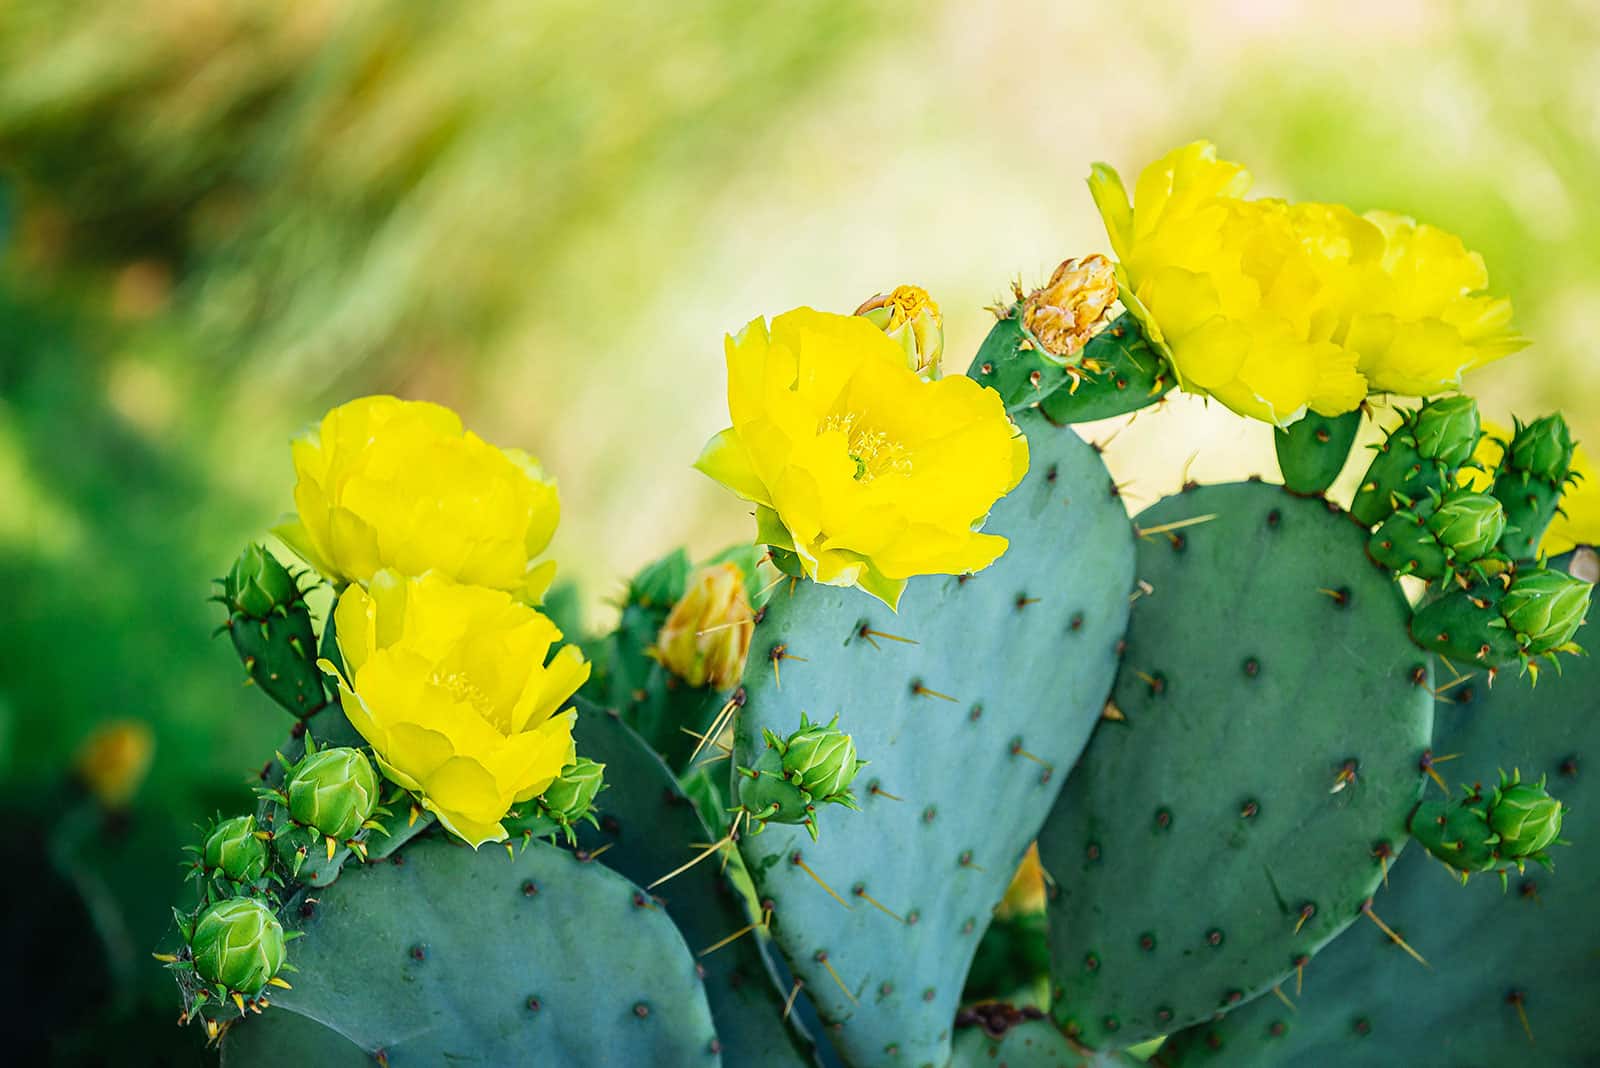 Opuntia cactus (prickly pear) with yellow flowers